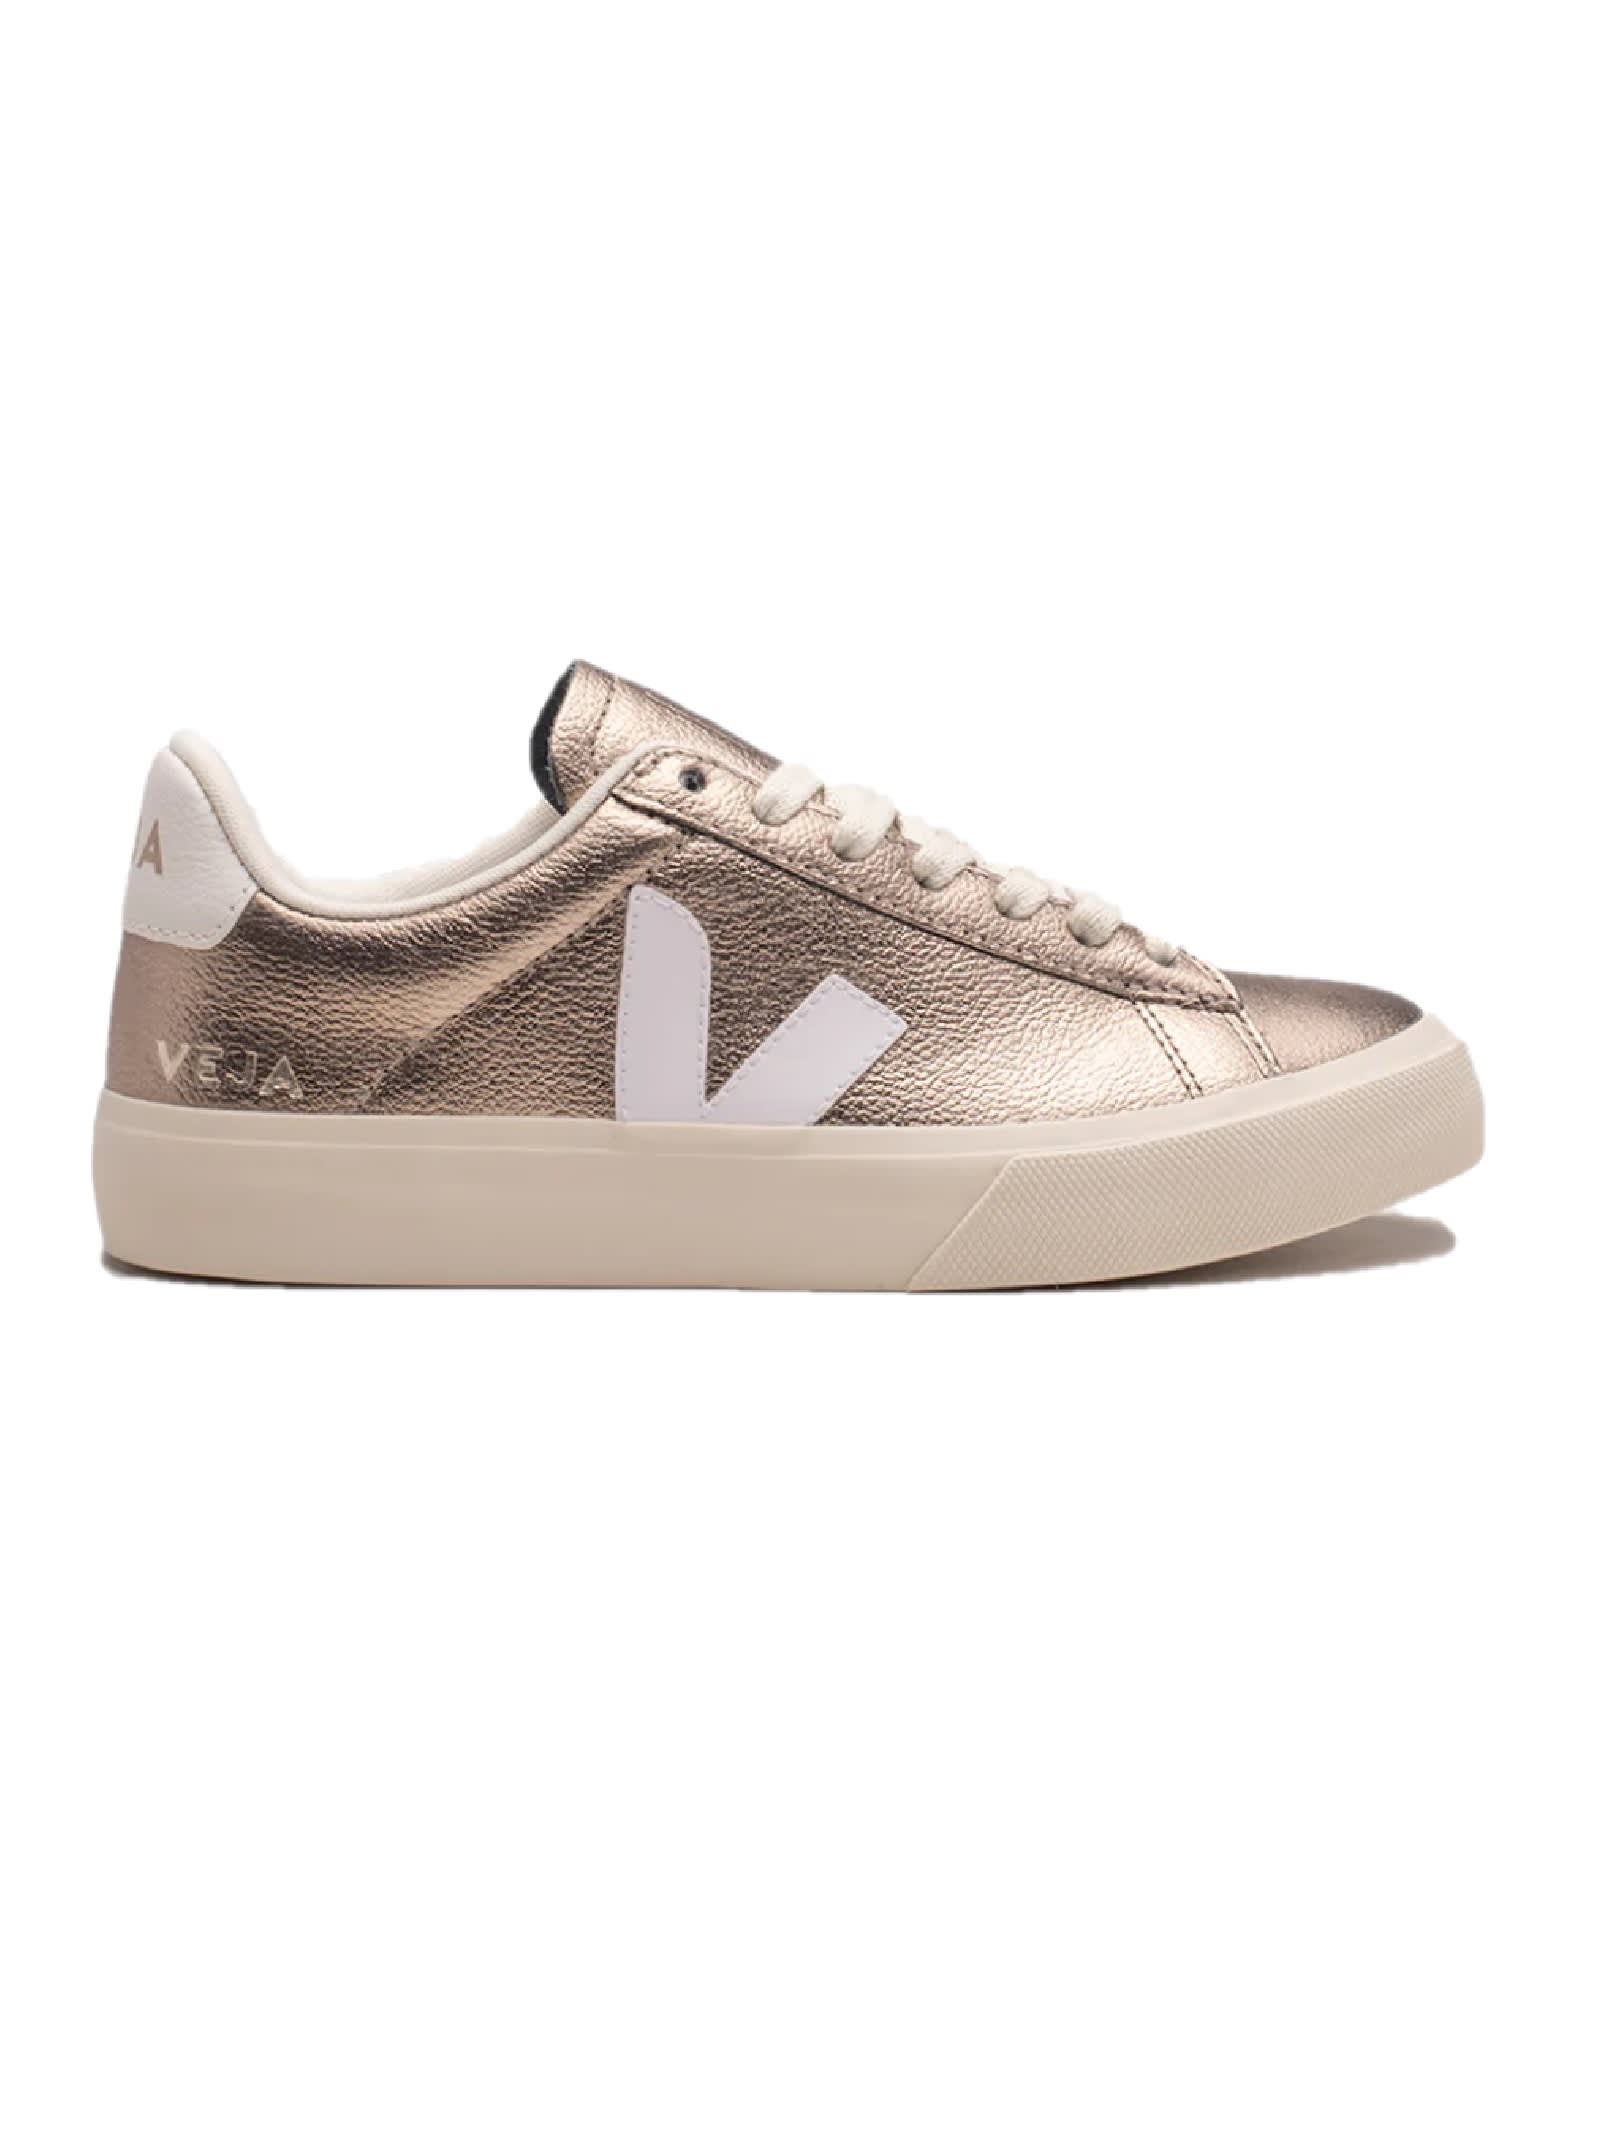 Veja Pack Woman Campo Chfree